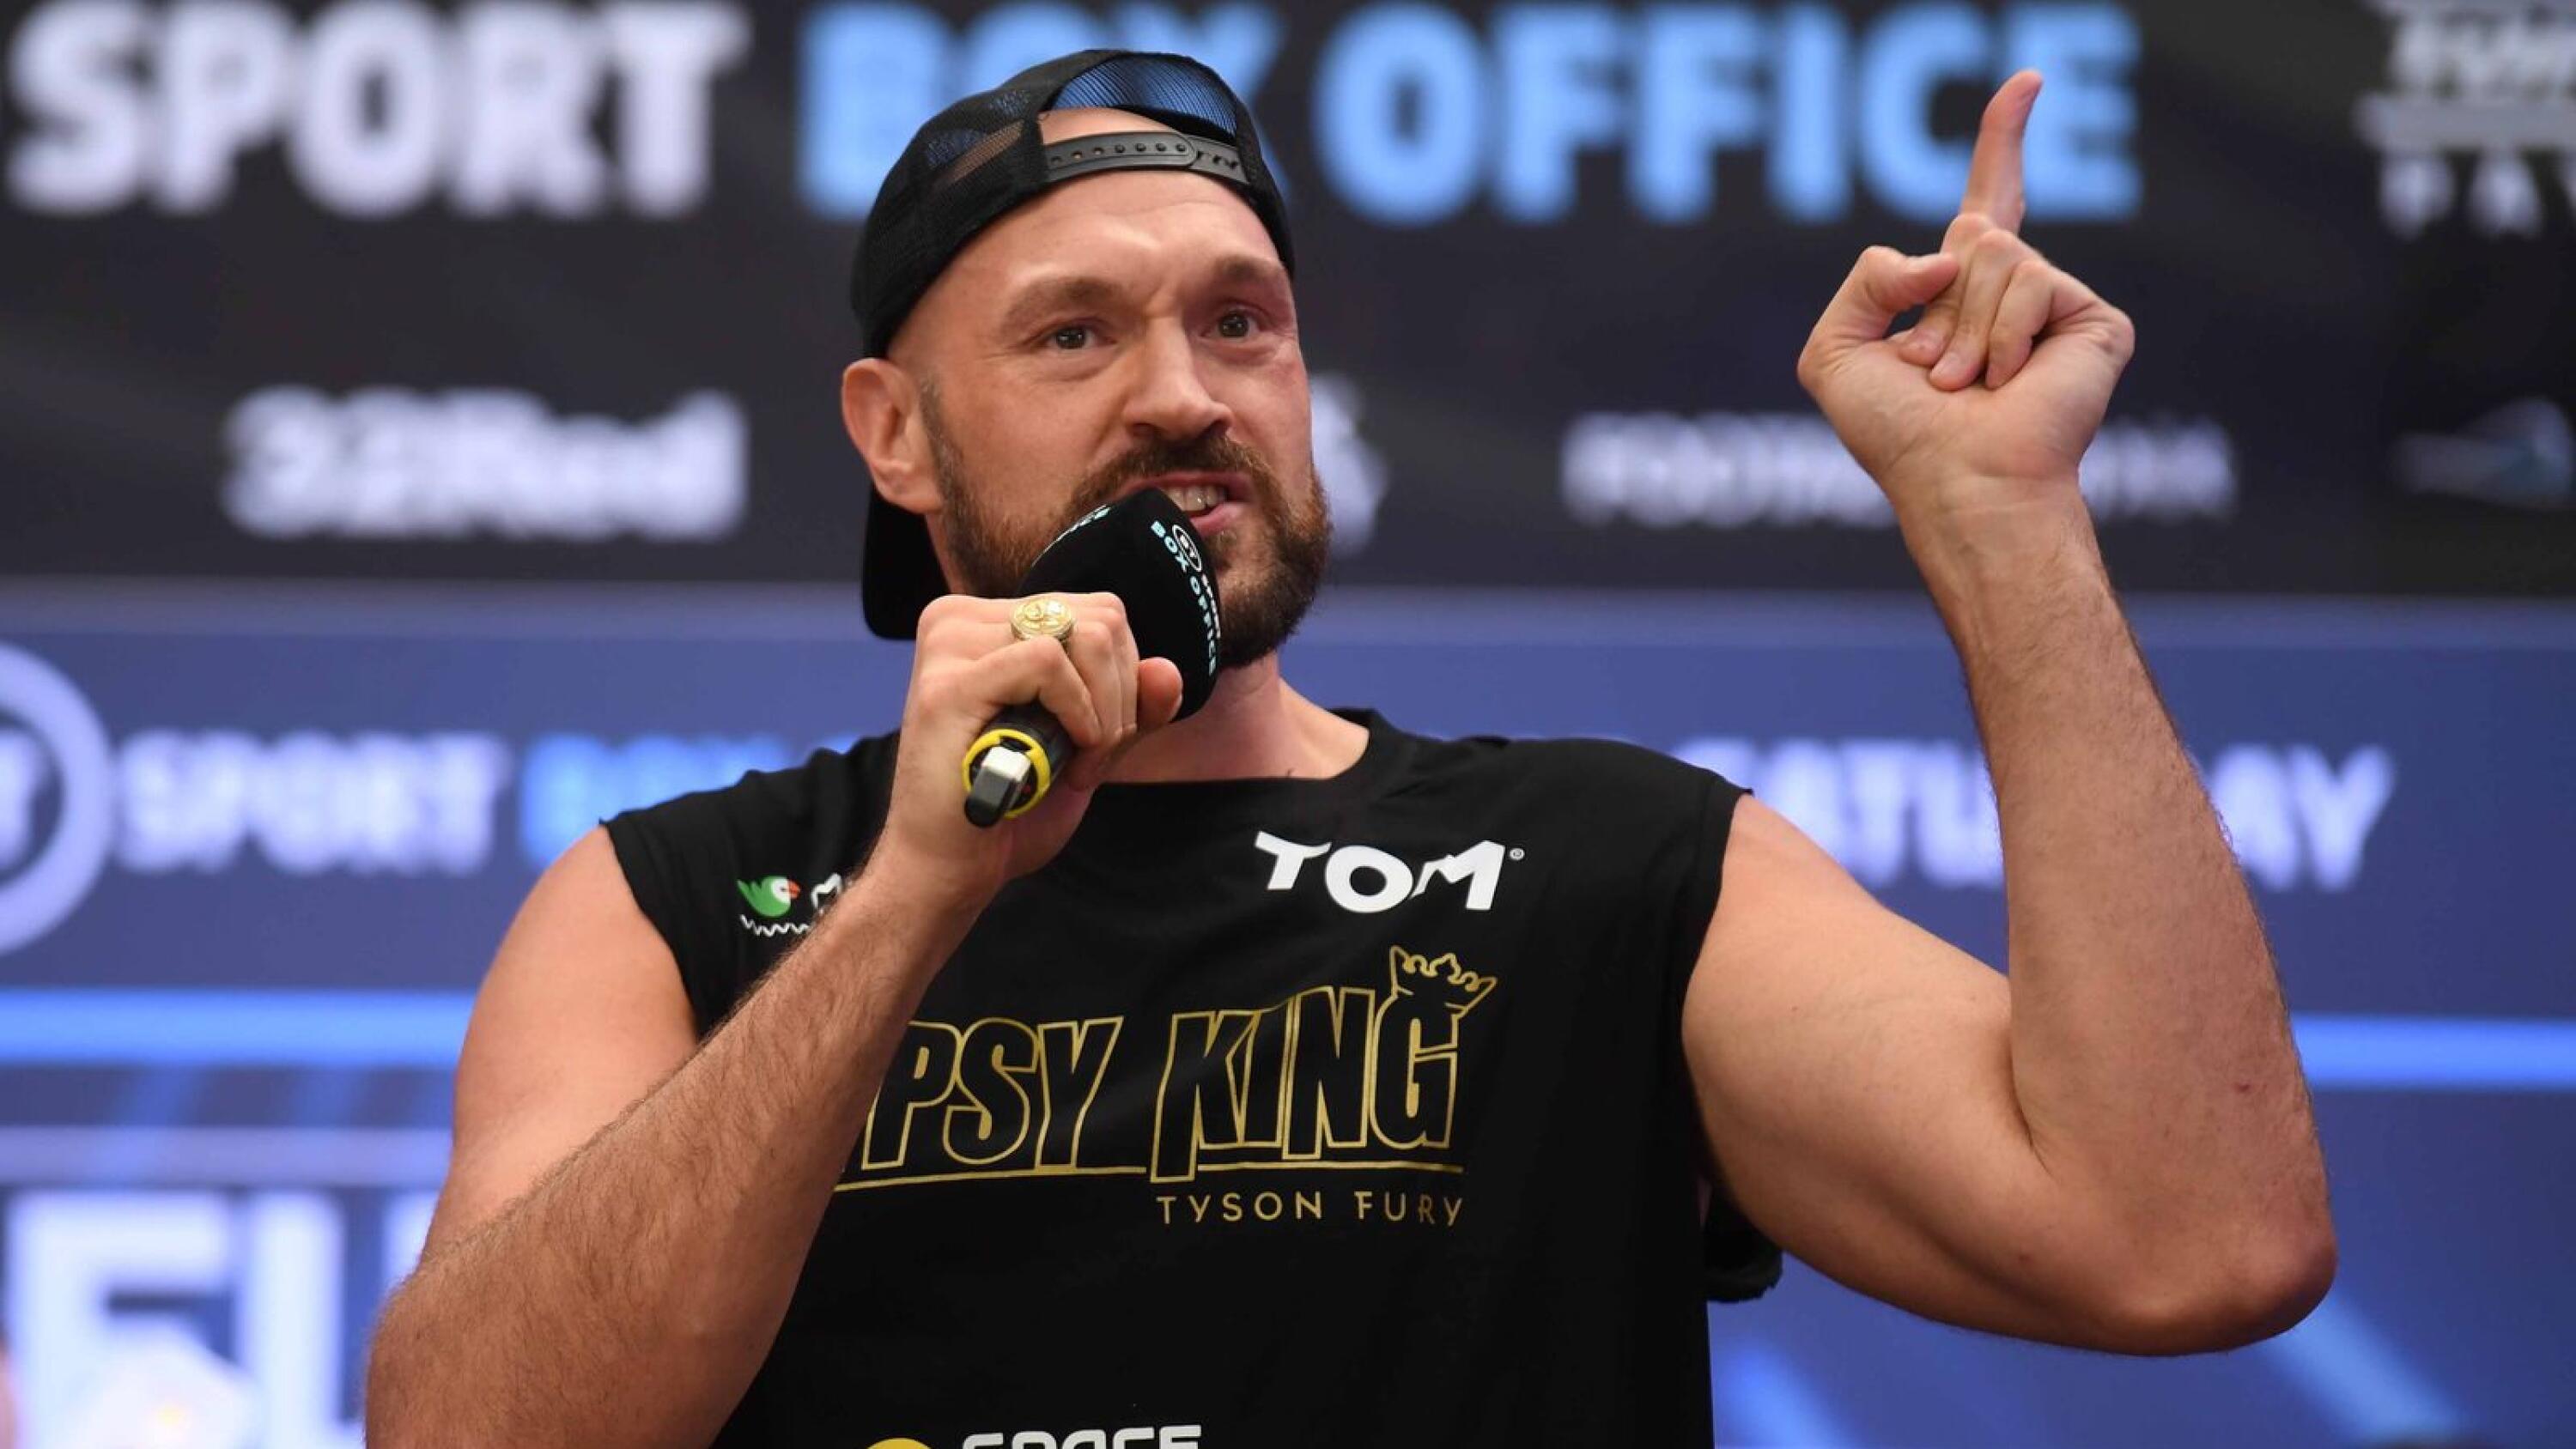 British boxer Tyson Fury speaks during the Weigh-In ahead of his fight with Dillian Whyte